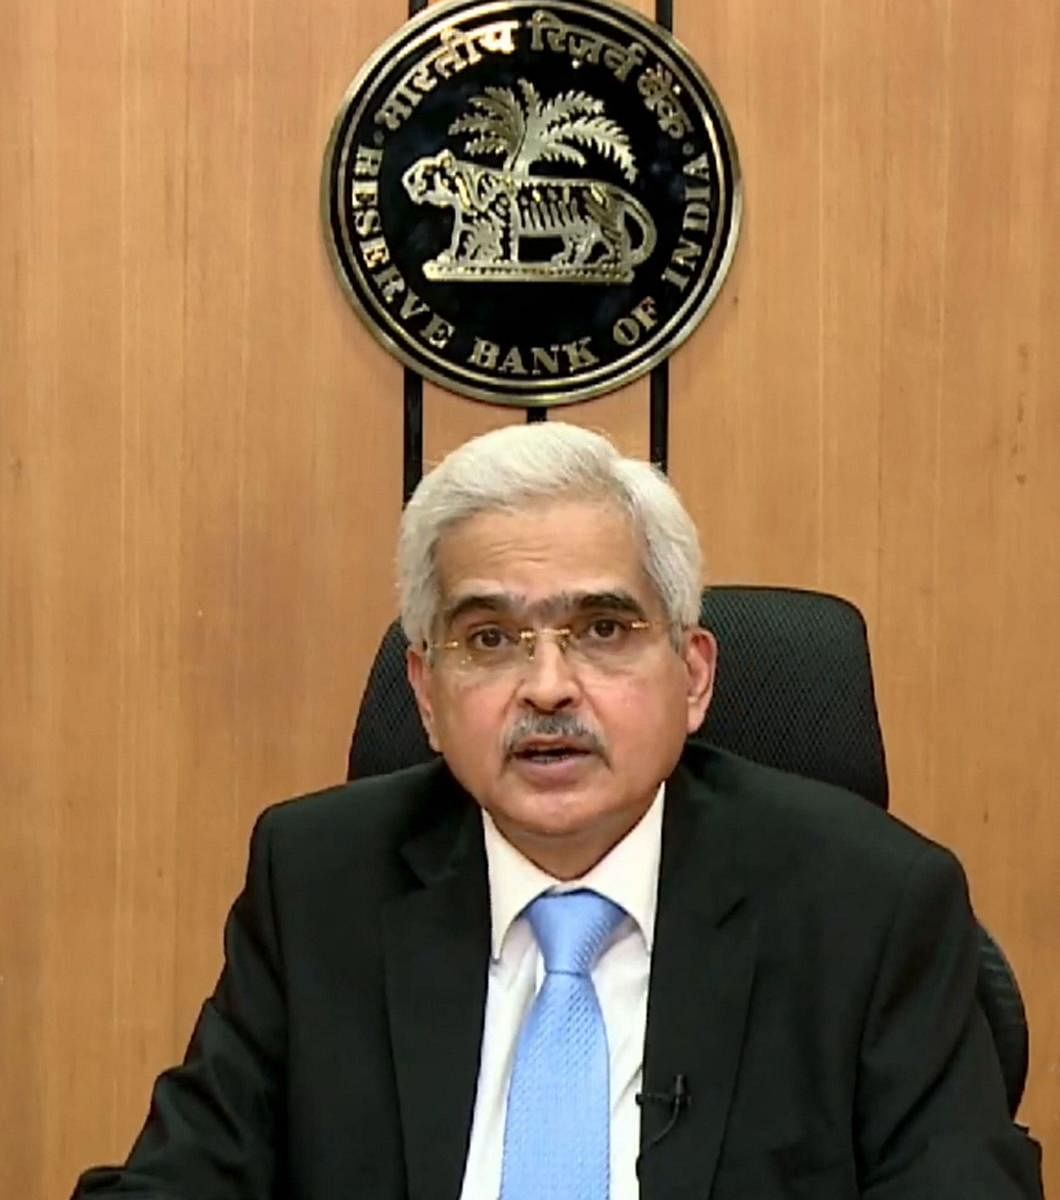 RBI Governor Shaktikanta Das addresses a press conference via video link during the nationwide lockdown to curb the spread of coronavirus, in Mumbai, Friday, April 17, 2020. (PTI Photo)